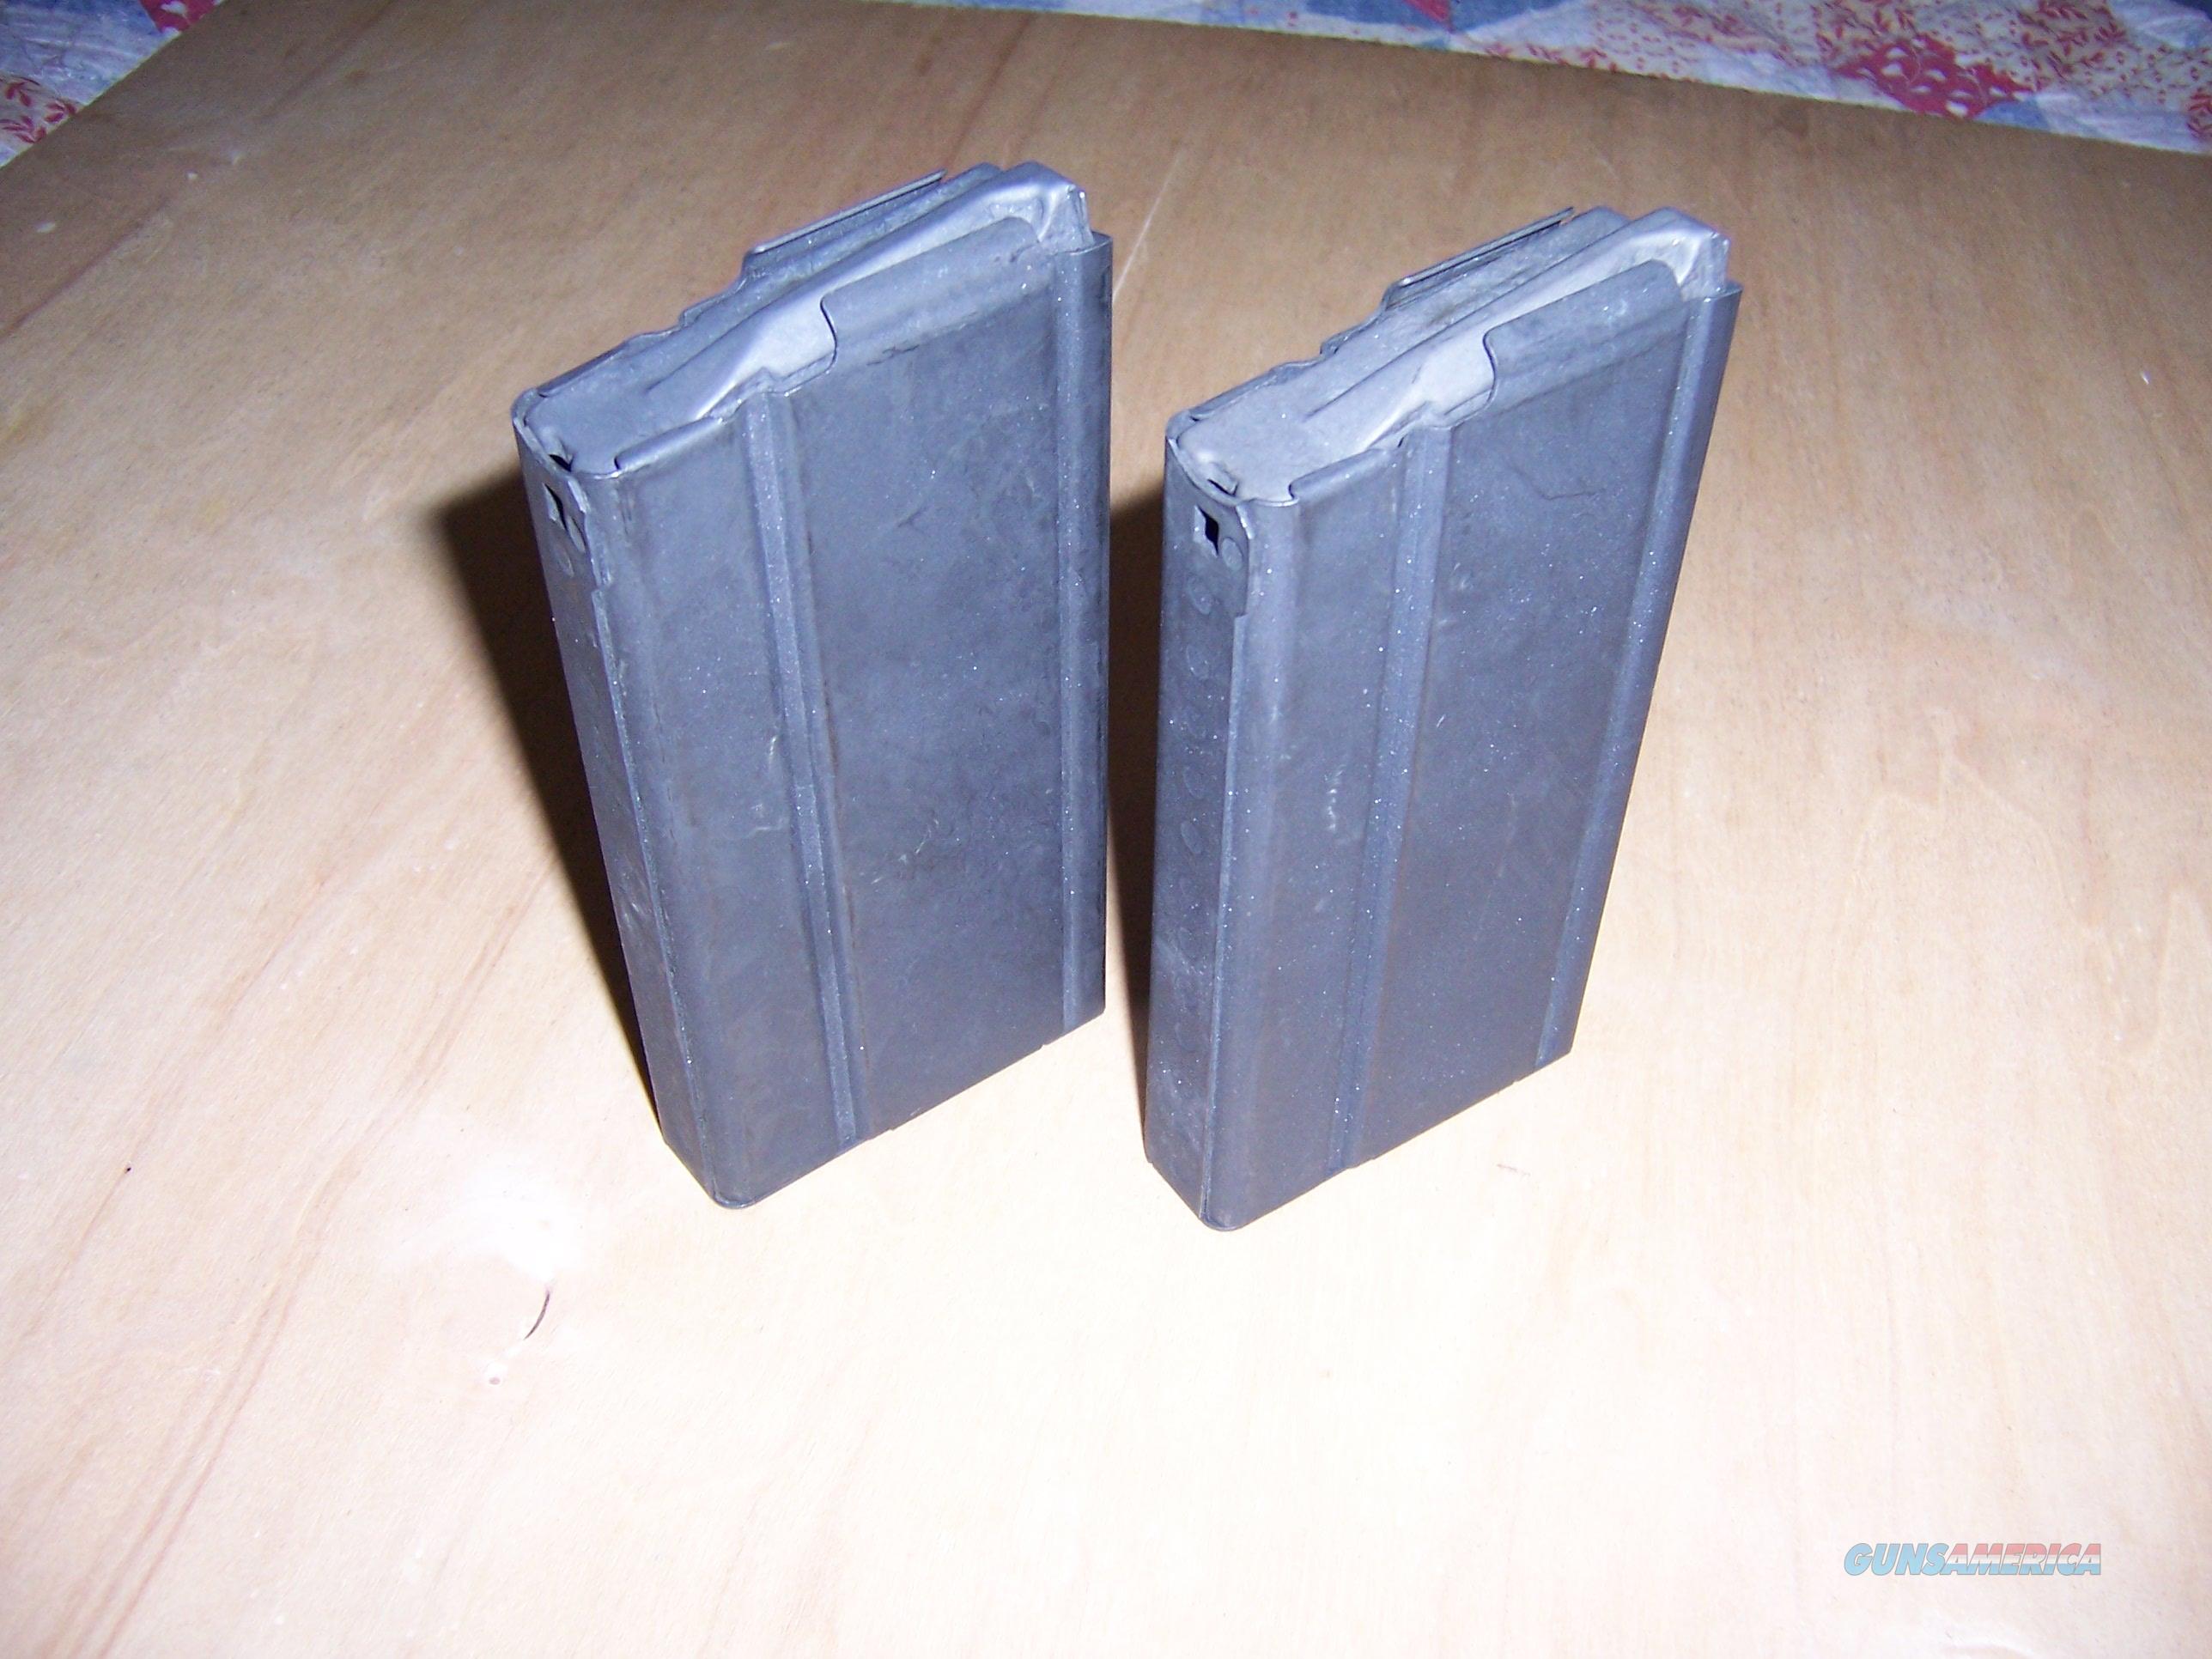 checkmate industries m1a mags